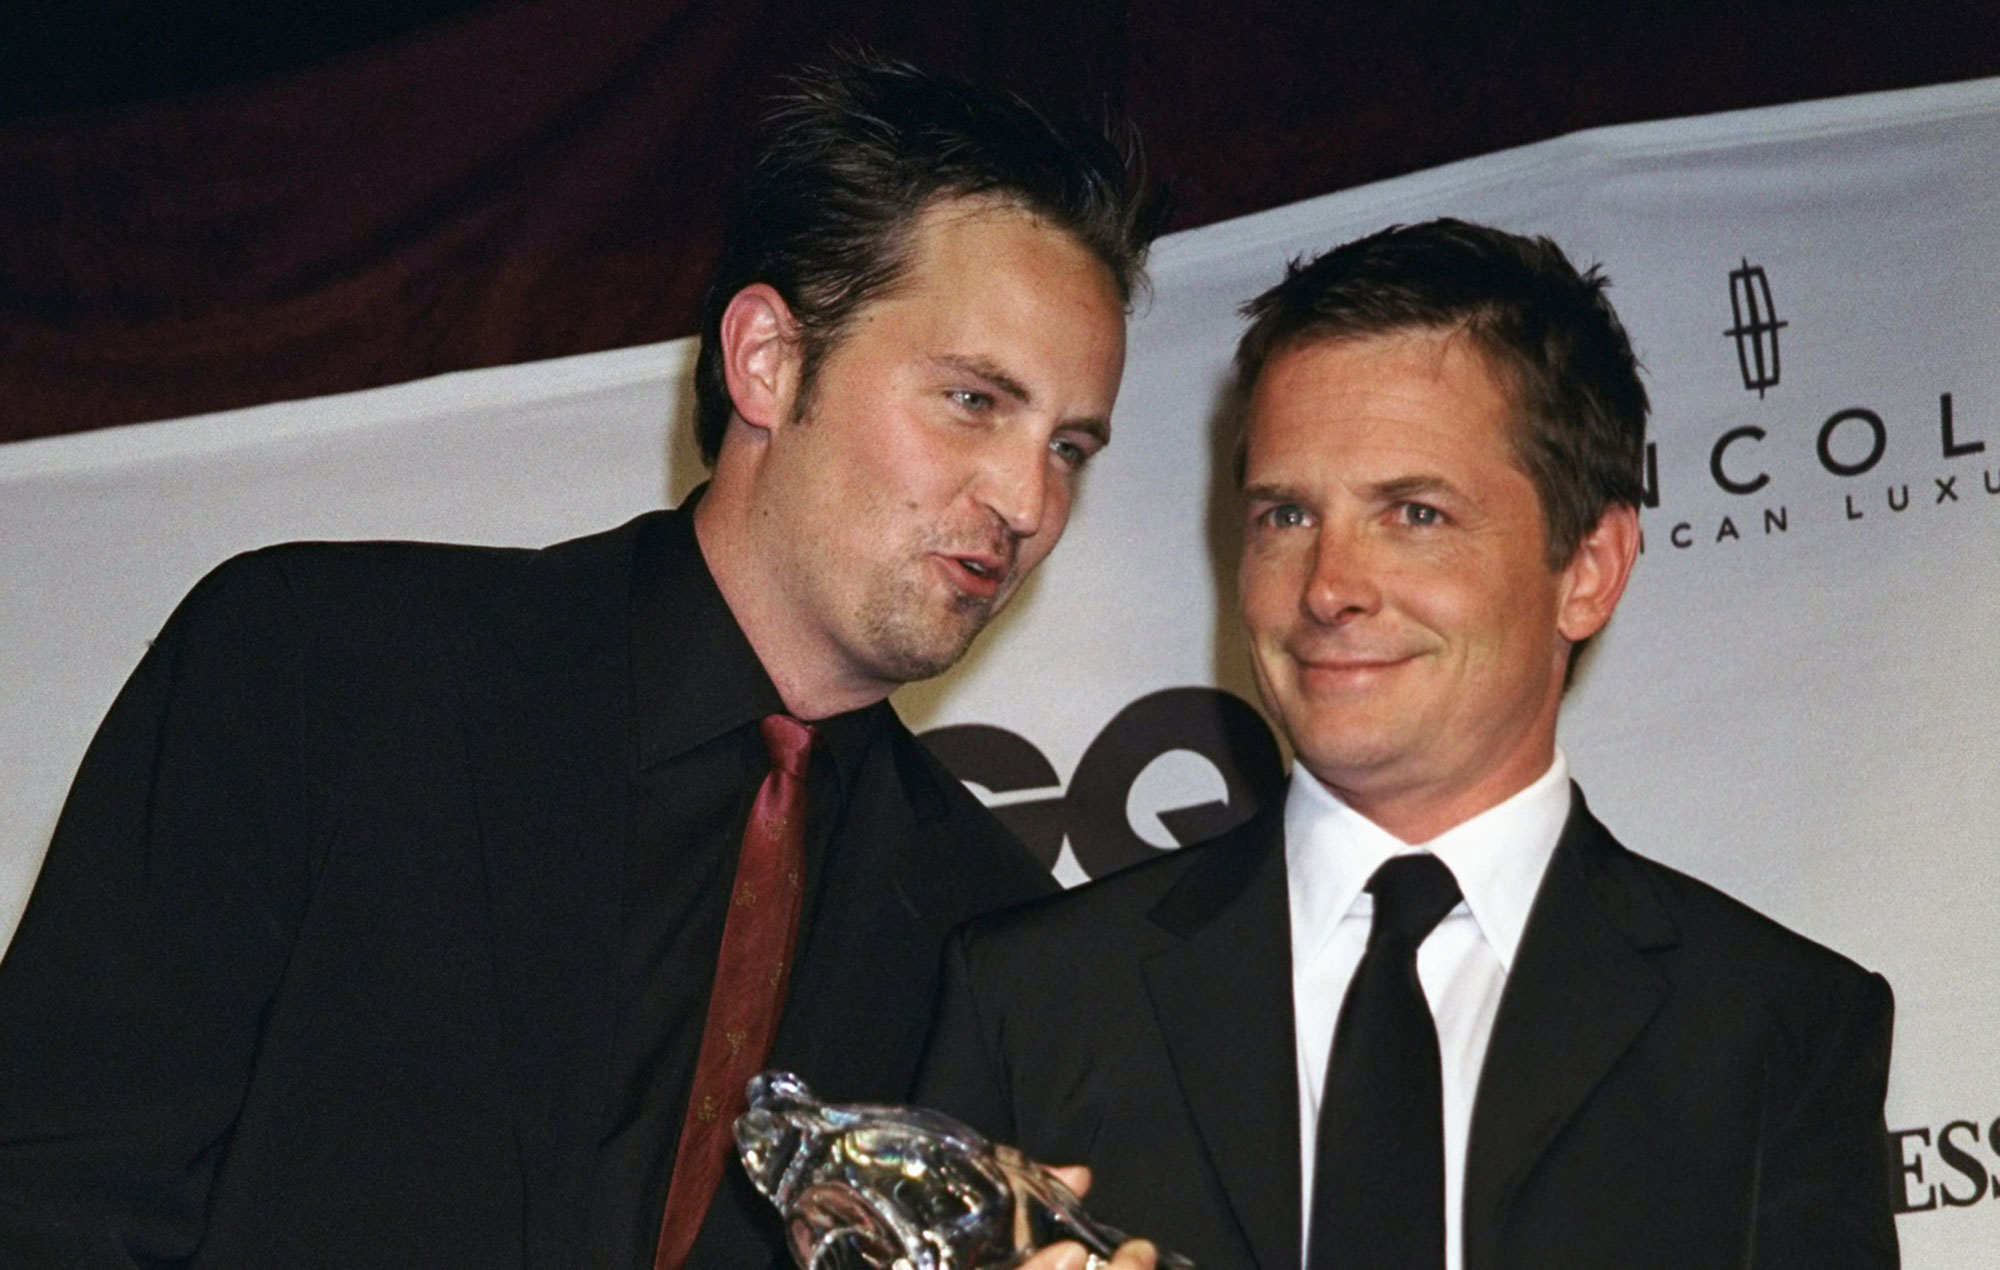 Michael J. Fox pays tribute to Matthew Perry with story about his unsung generosity